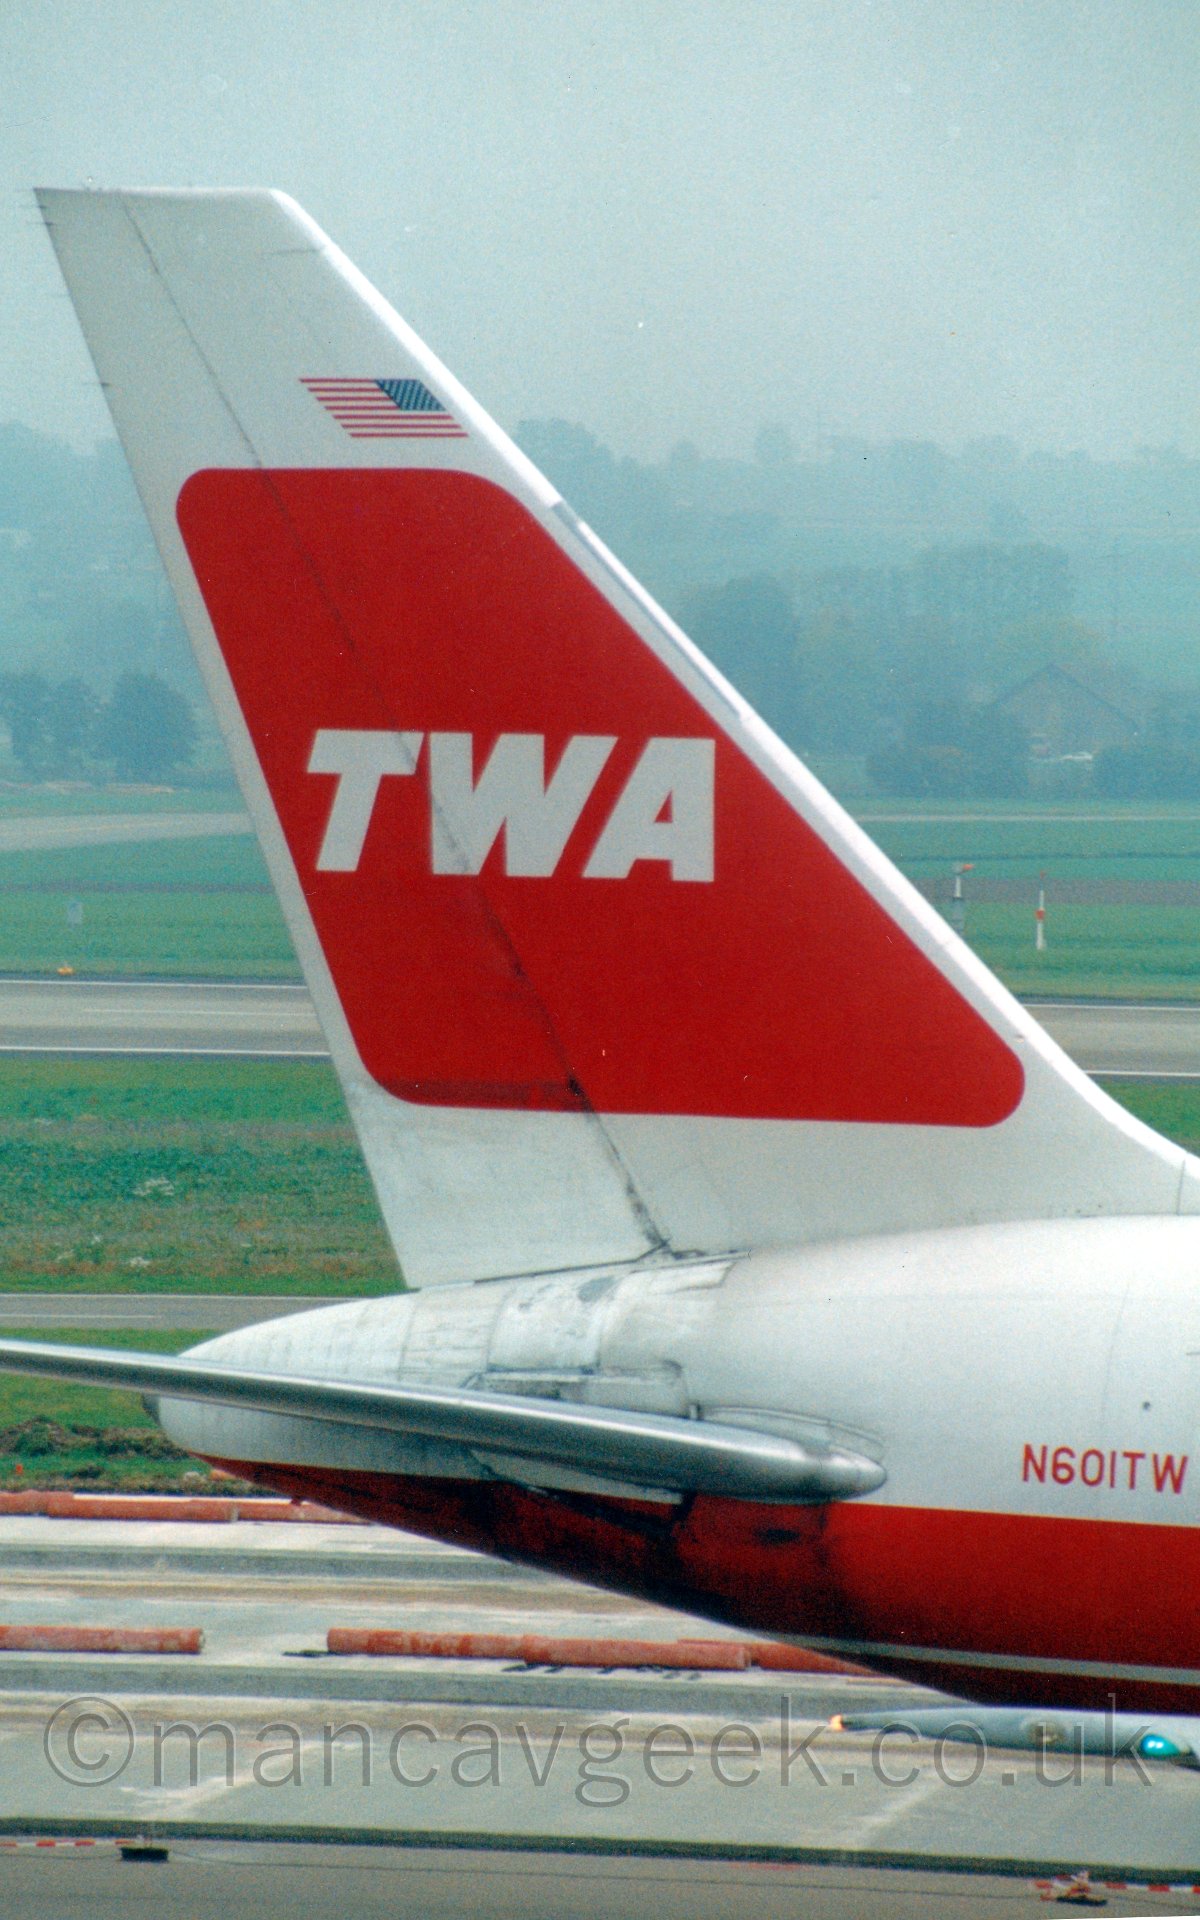 Closeup of the tail of a jet airliner taxiing from left to right. The plane is mostly white, with a pair of red cheatlines running along the middle of the body. The registration "N601TW" is on the upper rear fuselage in red. The tail is white, with red splotch in the middel containing the white letters "TWA", with a small, reversed United States flag just above. In the background, taxiways and runways lead off intop the distancewith trees in the distance slowly vanishing into the hazy grey sky.